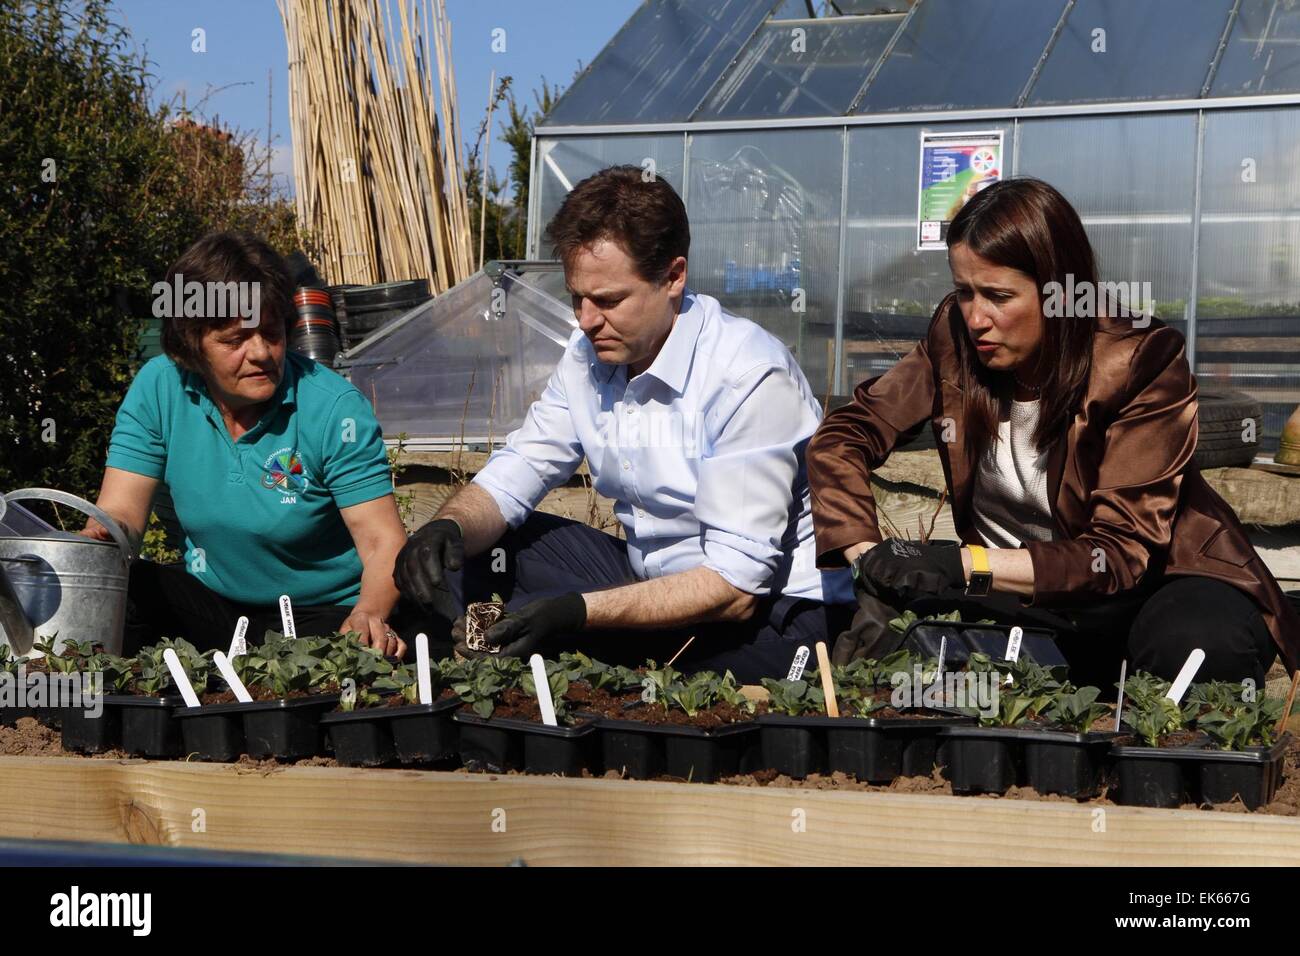 Newtown, UK. 7th April, 2015. Deputy Prime Minister & Leader of the Lib Dems, Nick Clegg, plants Broad Bean & Tomatoes with Ponthafren volunteer Janet Rogers & Lib Dem candidate Jane Dodds during his visit to Newtown in the Montgomeryshire Constituency as a part of his campaign for votes in the forthcoming General Election, UK. Credit:  Jon Freeman/Alamy Live News Stock Photo